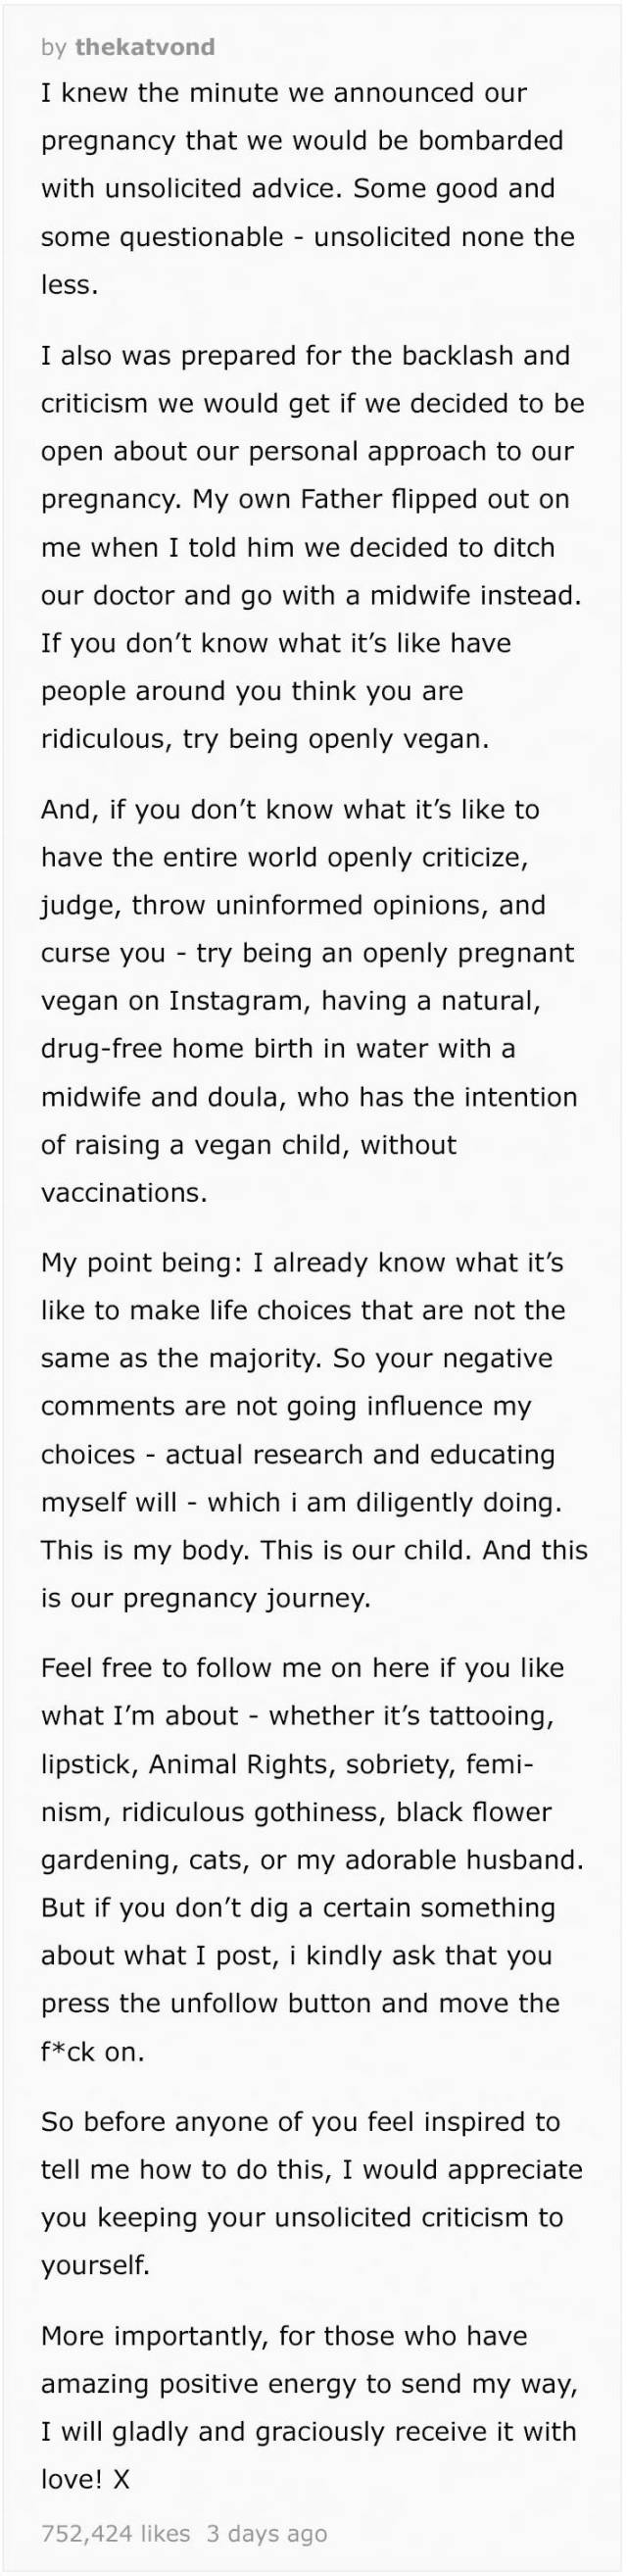 Kat Von D Claimed That Her Unborn Child Will Be Raised Vegan And Without Vaccines, Got Controversial Response From The Internet